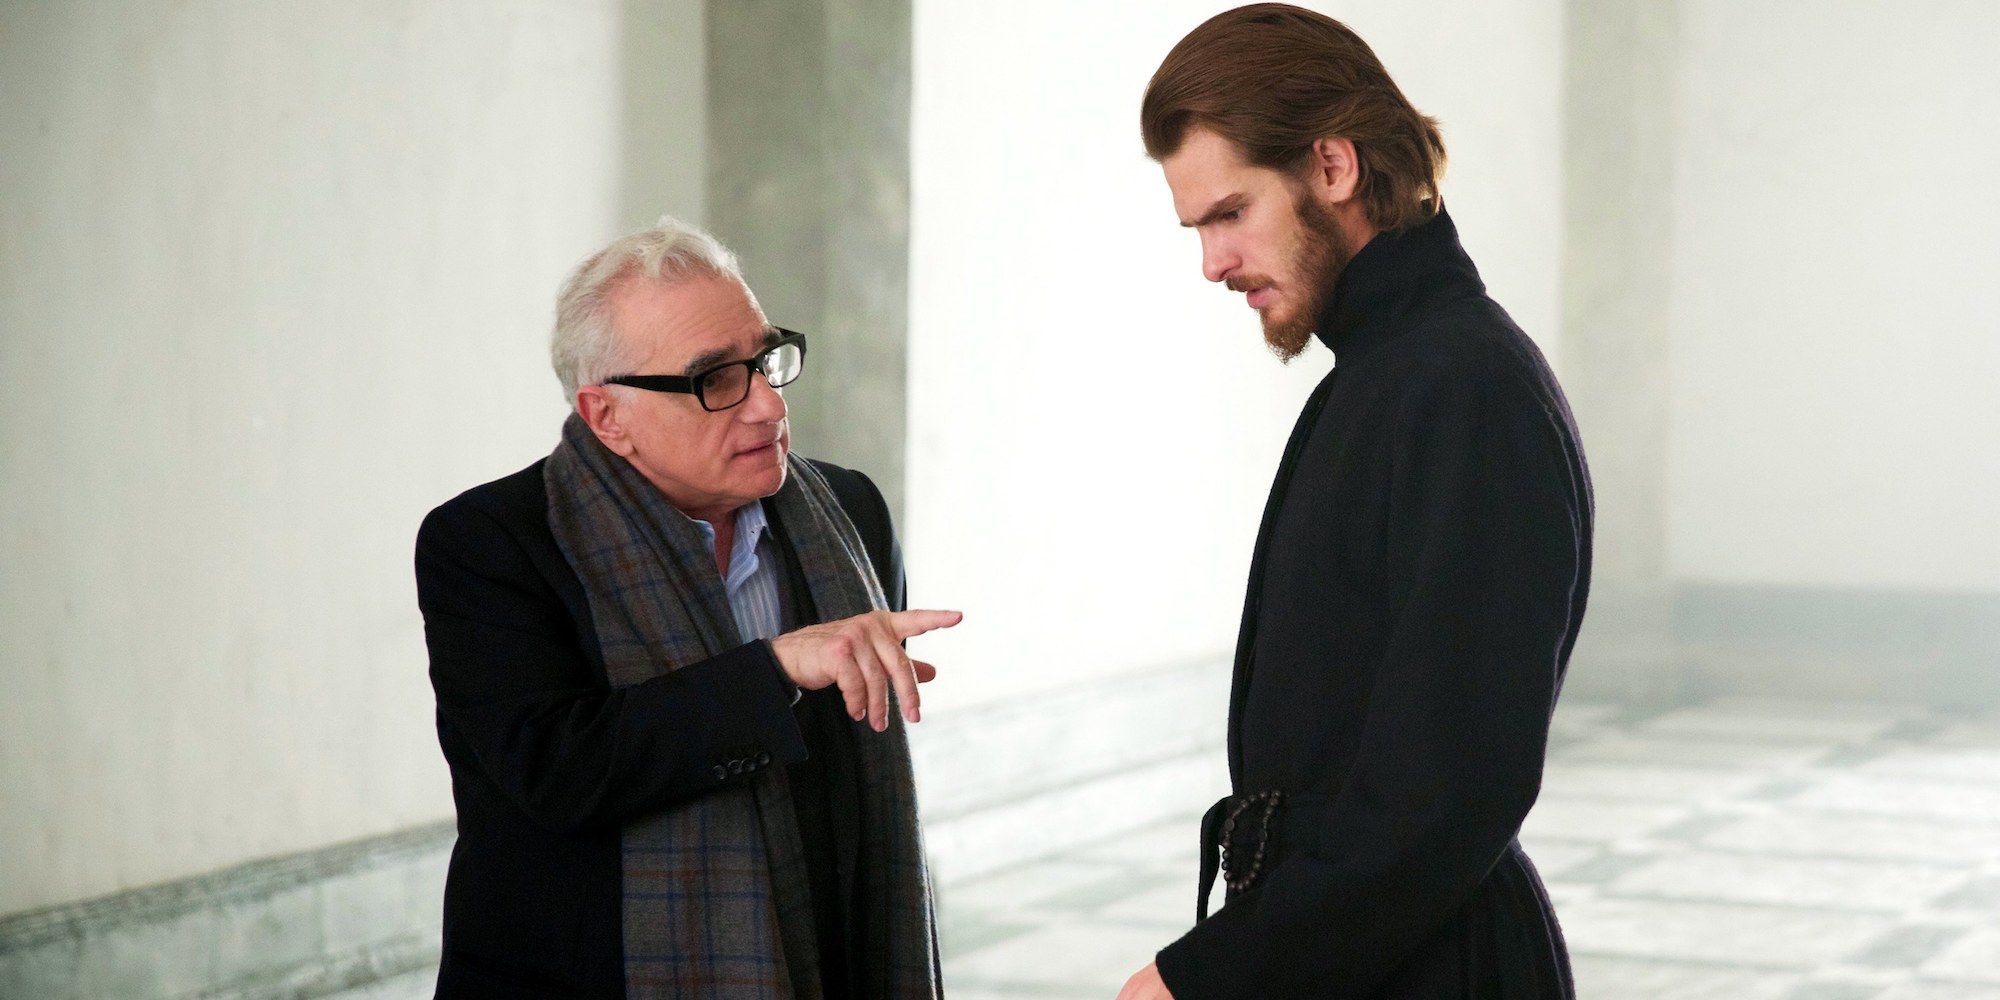 Martin Scorsese directing Andrew Garfield on the set of Silence